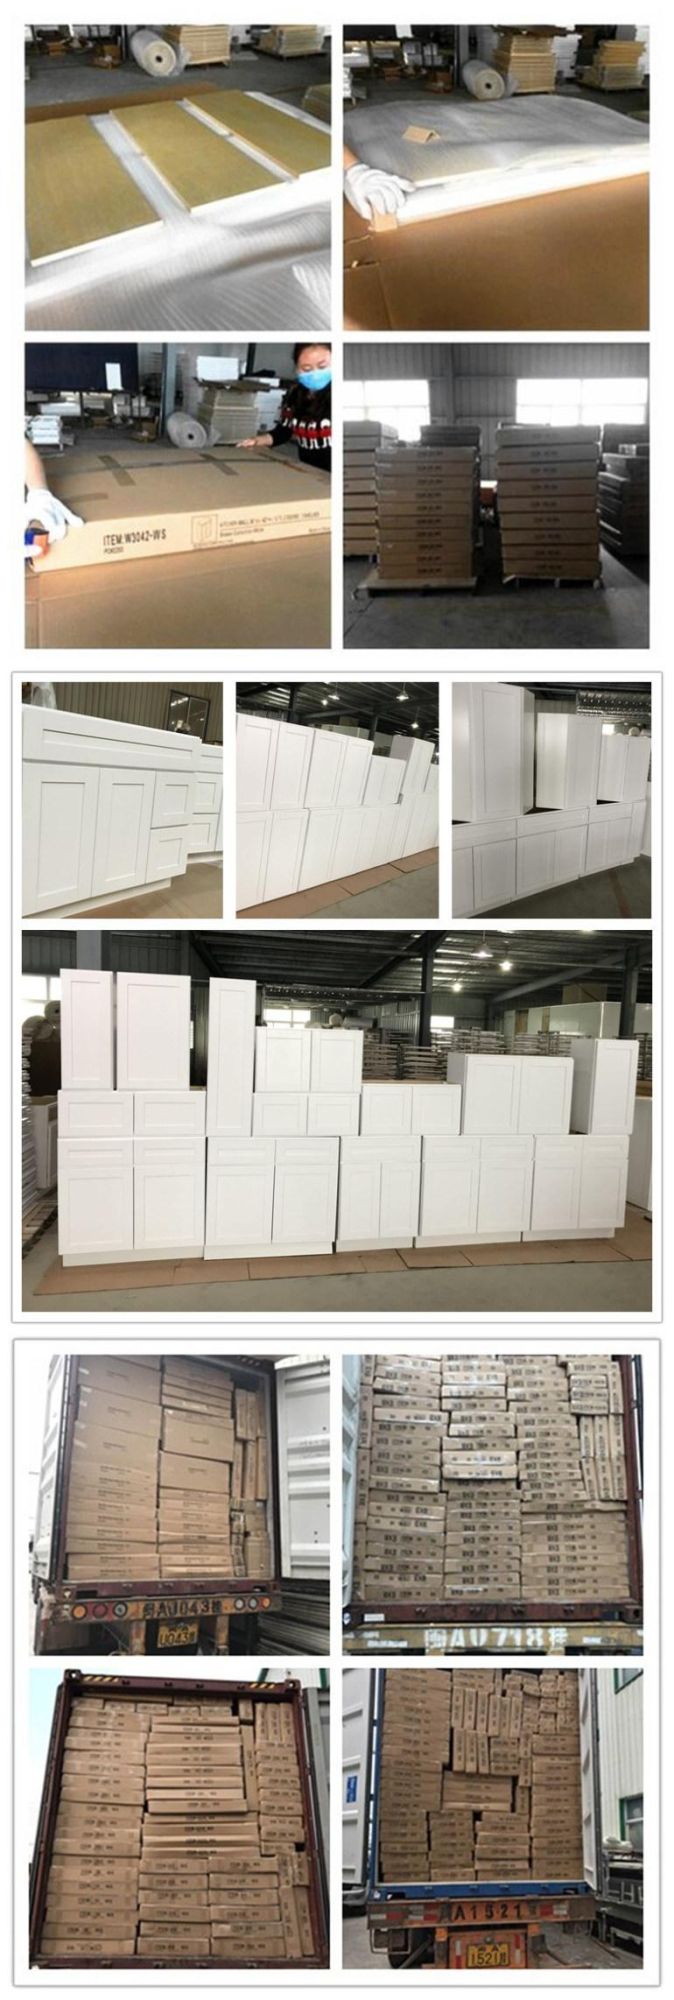 Chinese Furniture Suppliers Customized Kitchen Cabinets Solid Wood Modern Modular